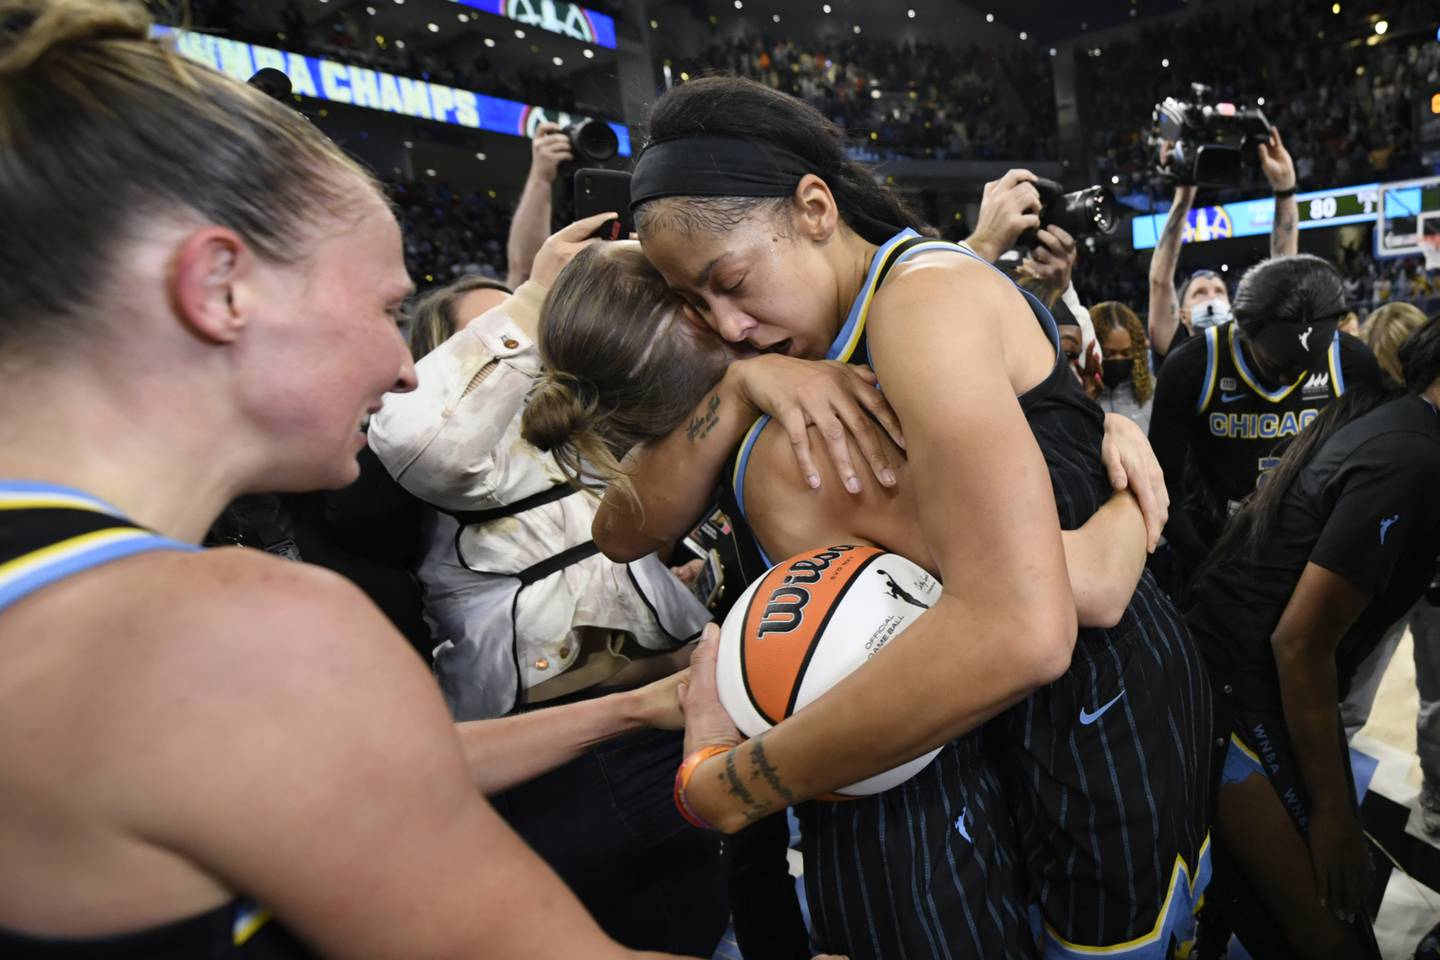 Chicago Sky's Candice Parker, center right, and Allie Quigley, center left, celebrate after defeating the Phoenix Mercury 80-74 in Game 4 of the WNBA Finals to win the championship, Sunday, Oct. 17, 2021, in Chicago.